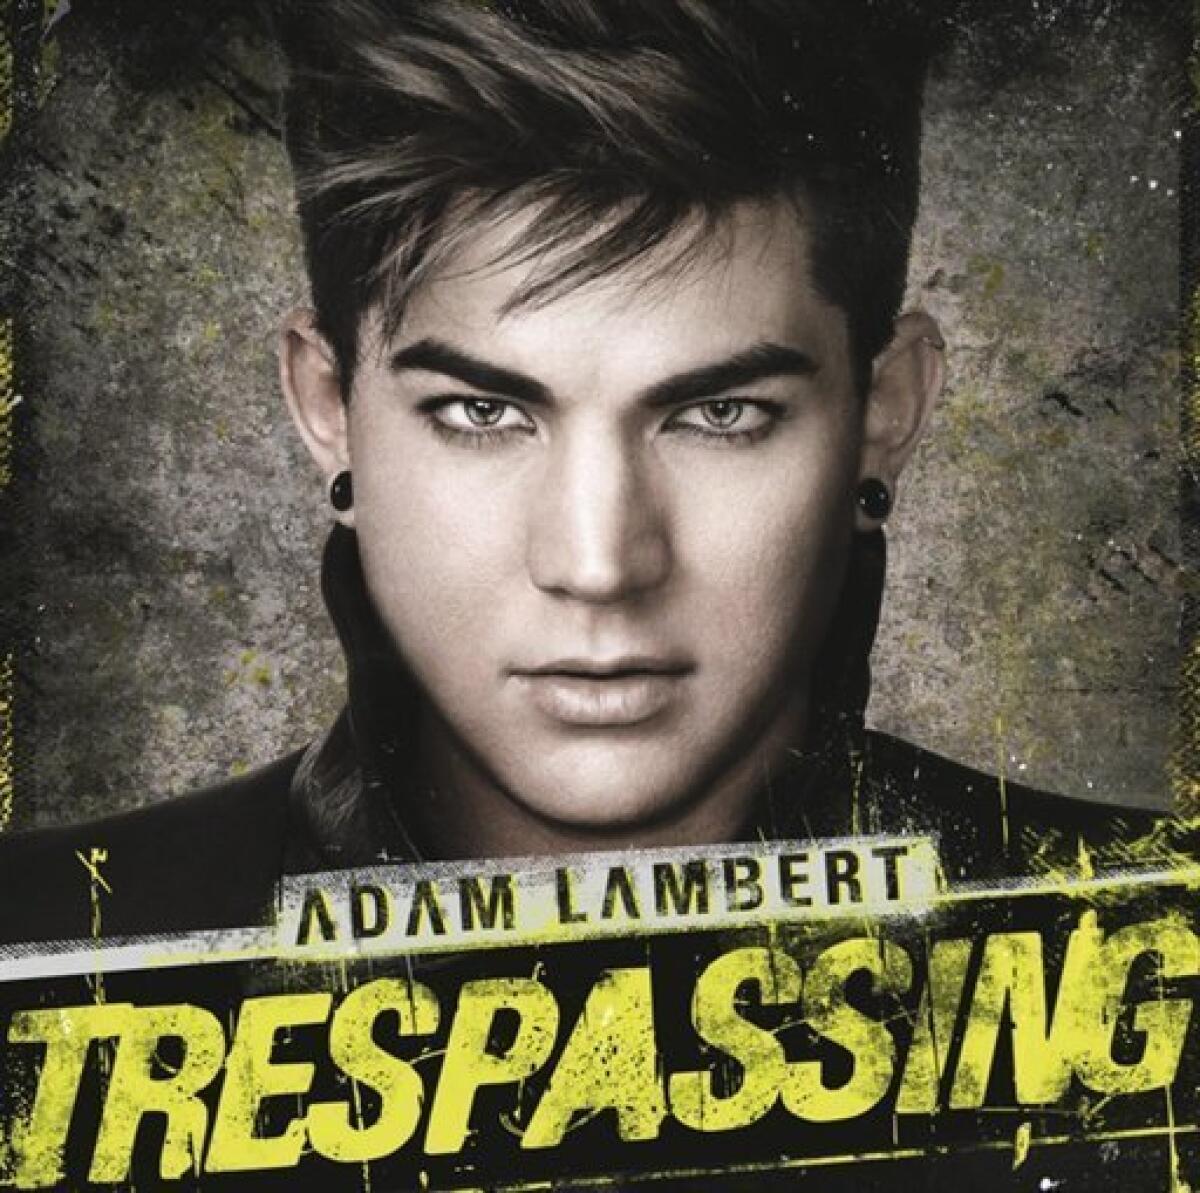 In this CD cover image released by RCA, the latest release by Adam Lambert "Trespassing," is shown. (AP Photo/RCA)